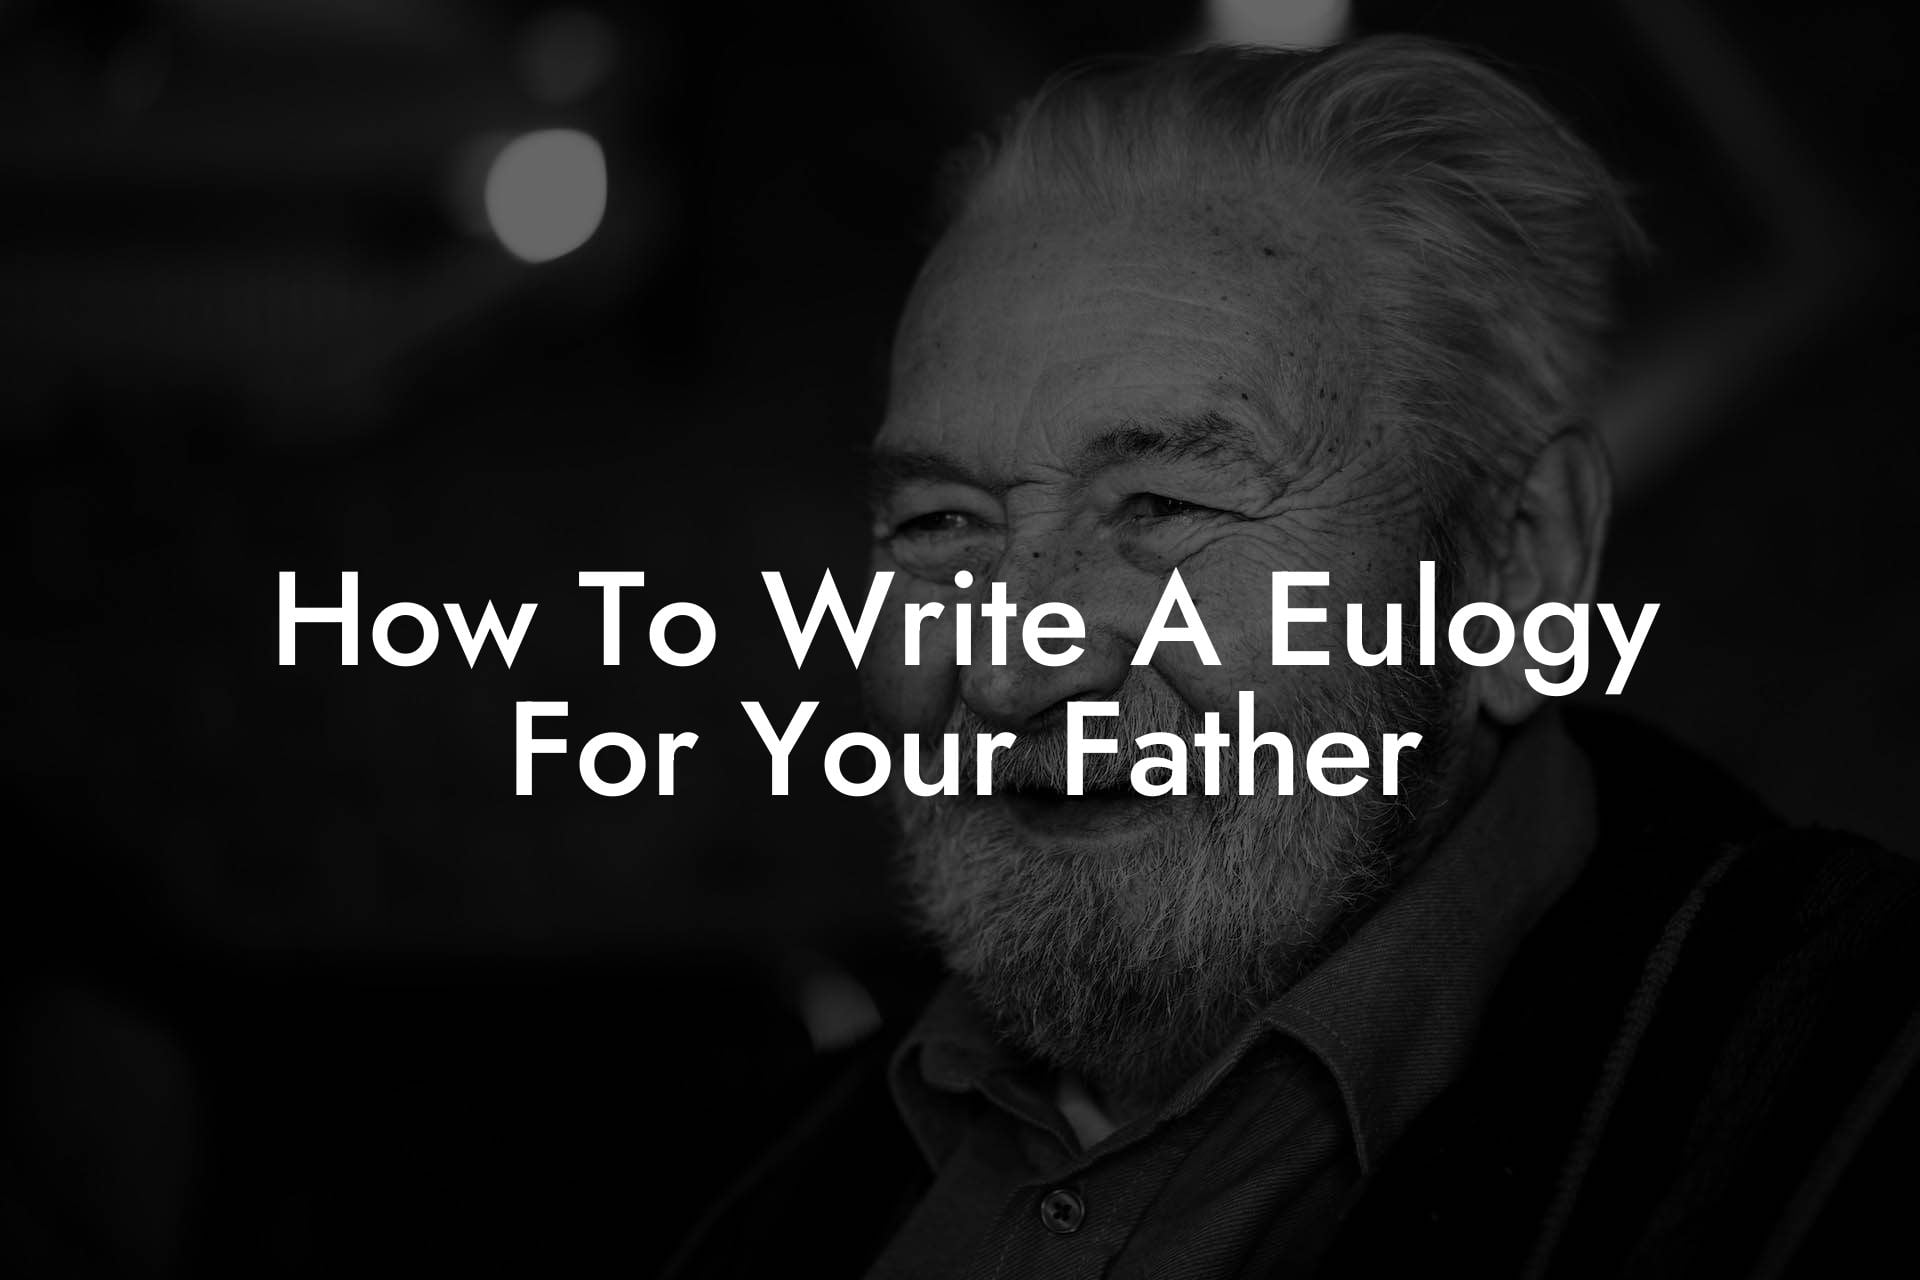 How To Write A Eulogy For Your Father